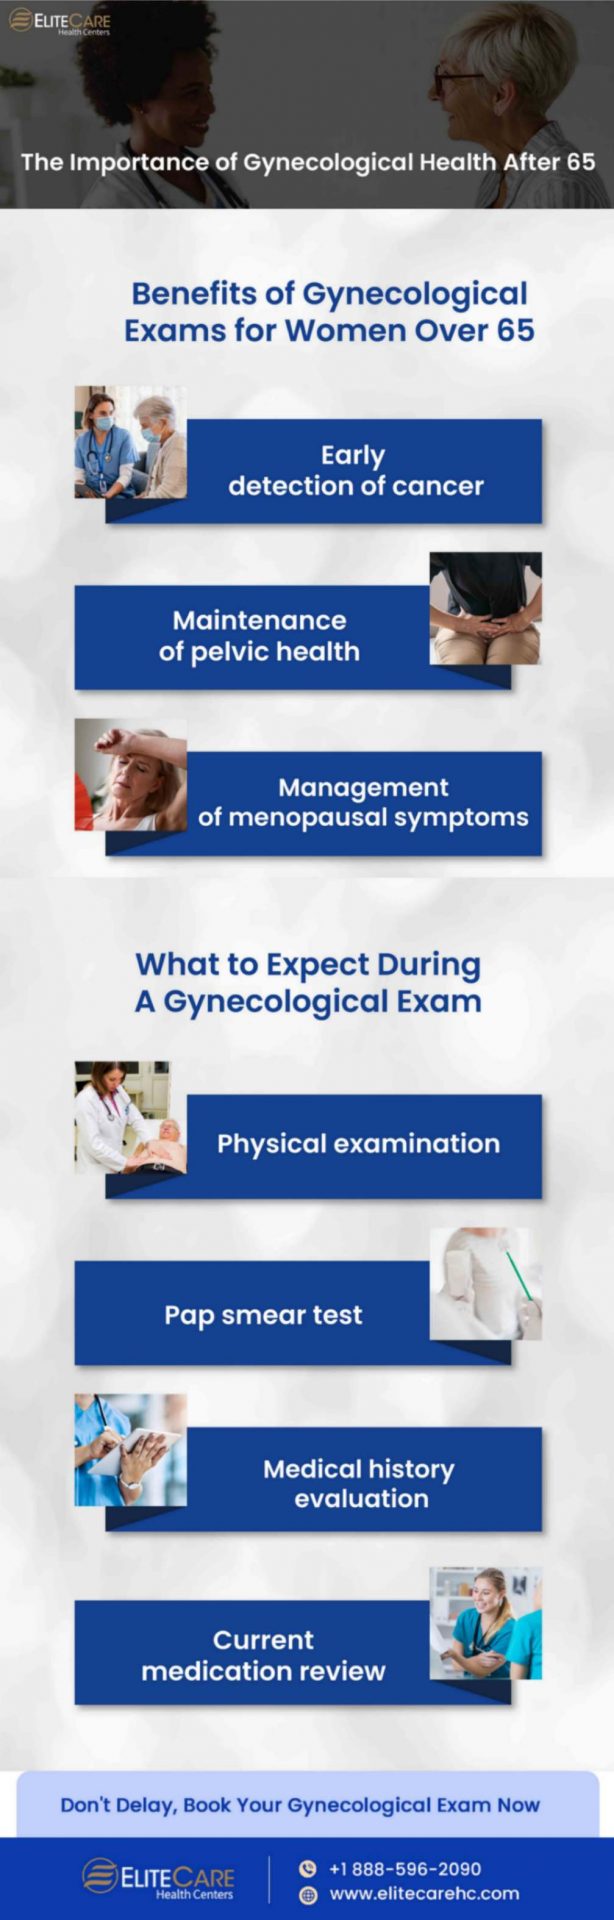 The Importance of Gynecological Health After 65 | Infographic